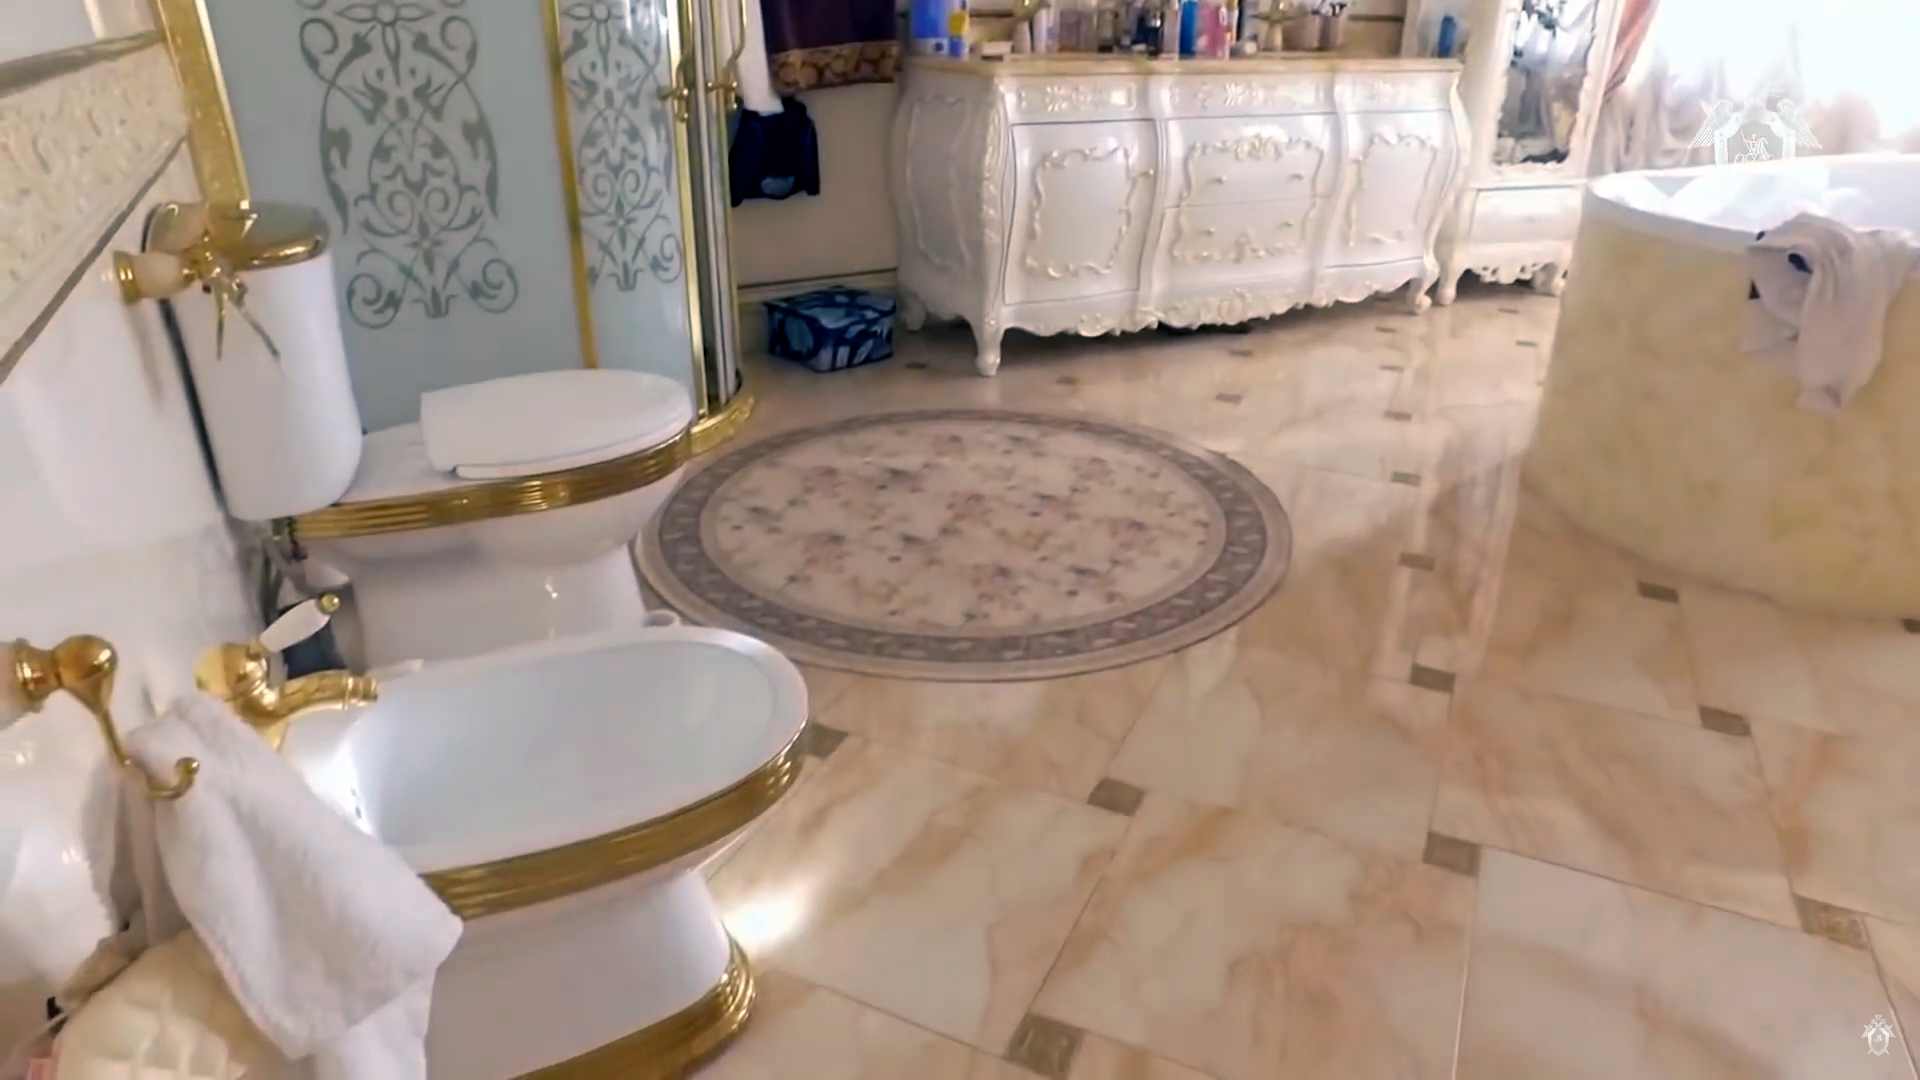 This toilet and bidet with gold trim were spotted where?